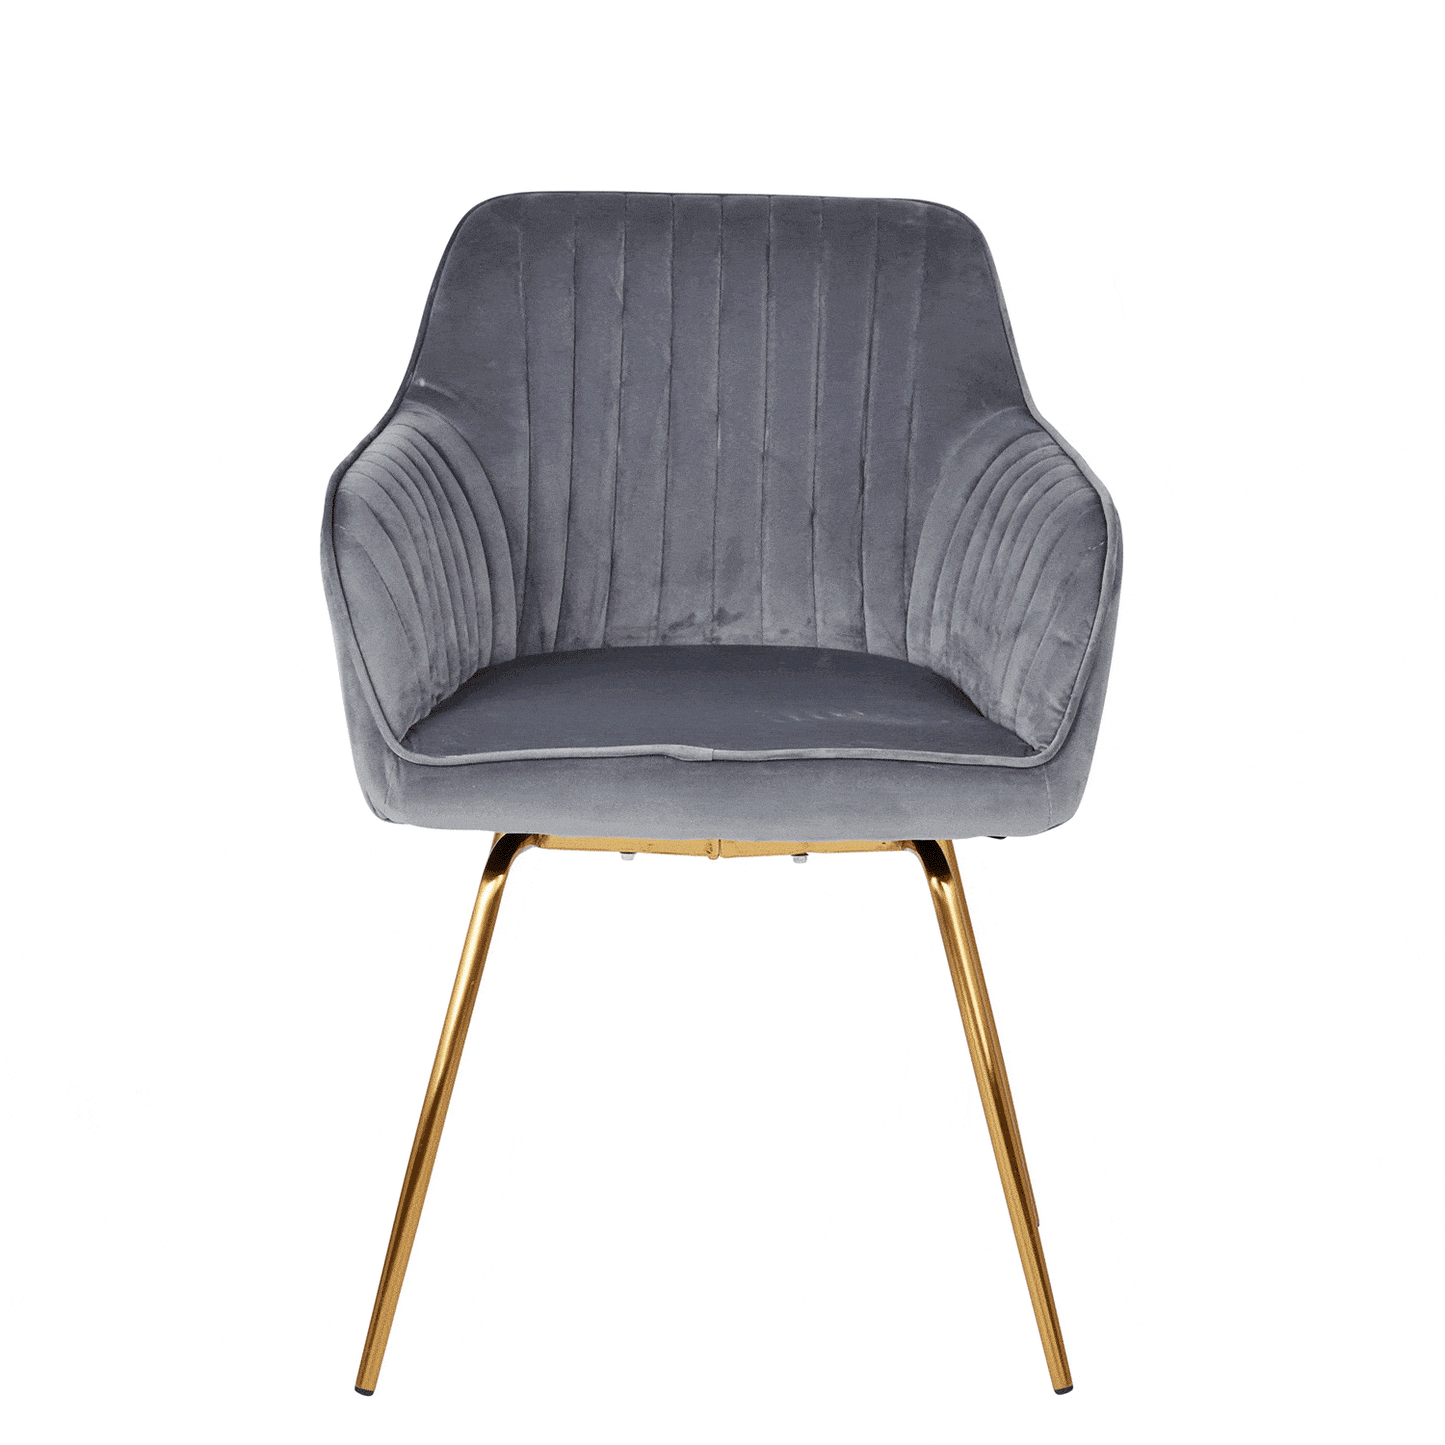 Darcy swivel chair - velvet - grey and gold - Laura James